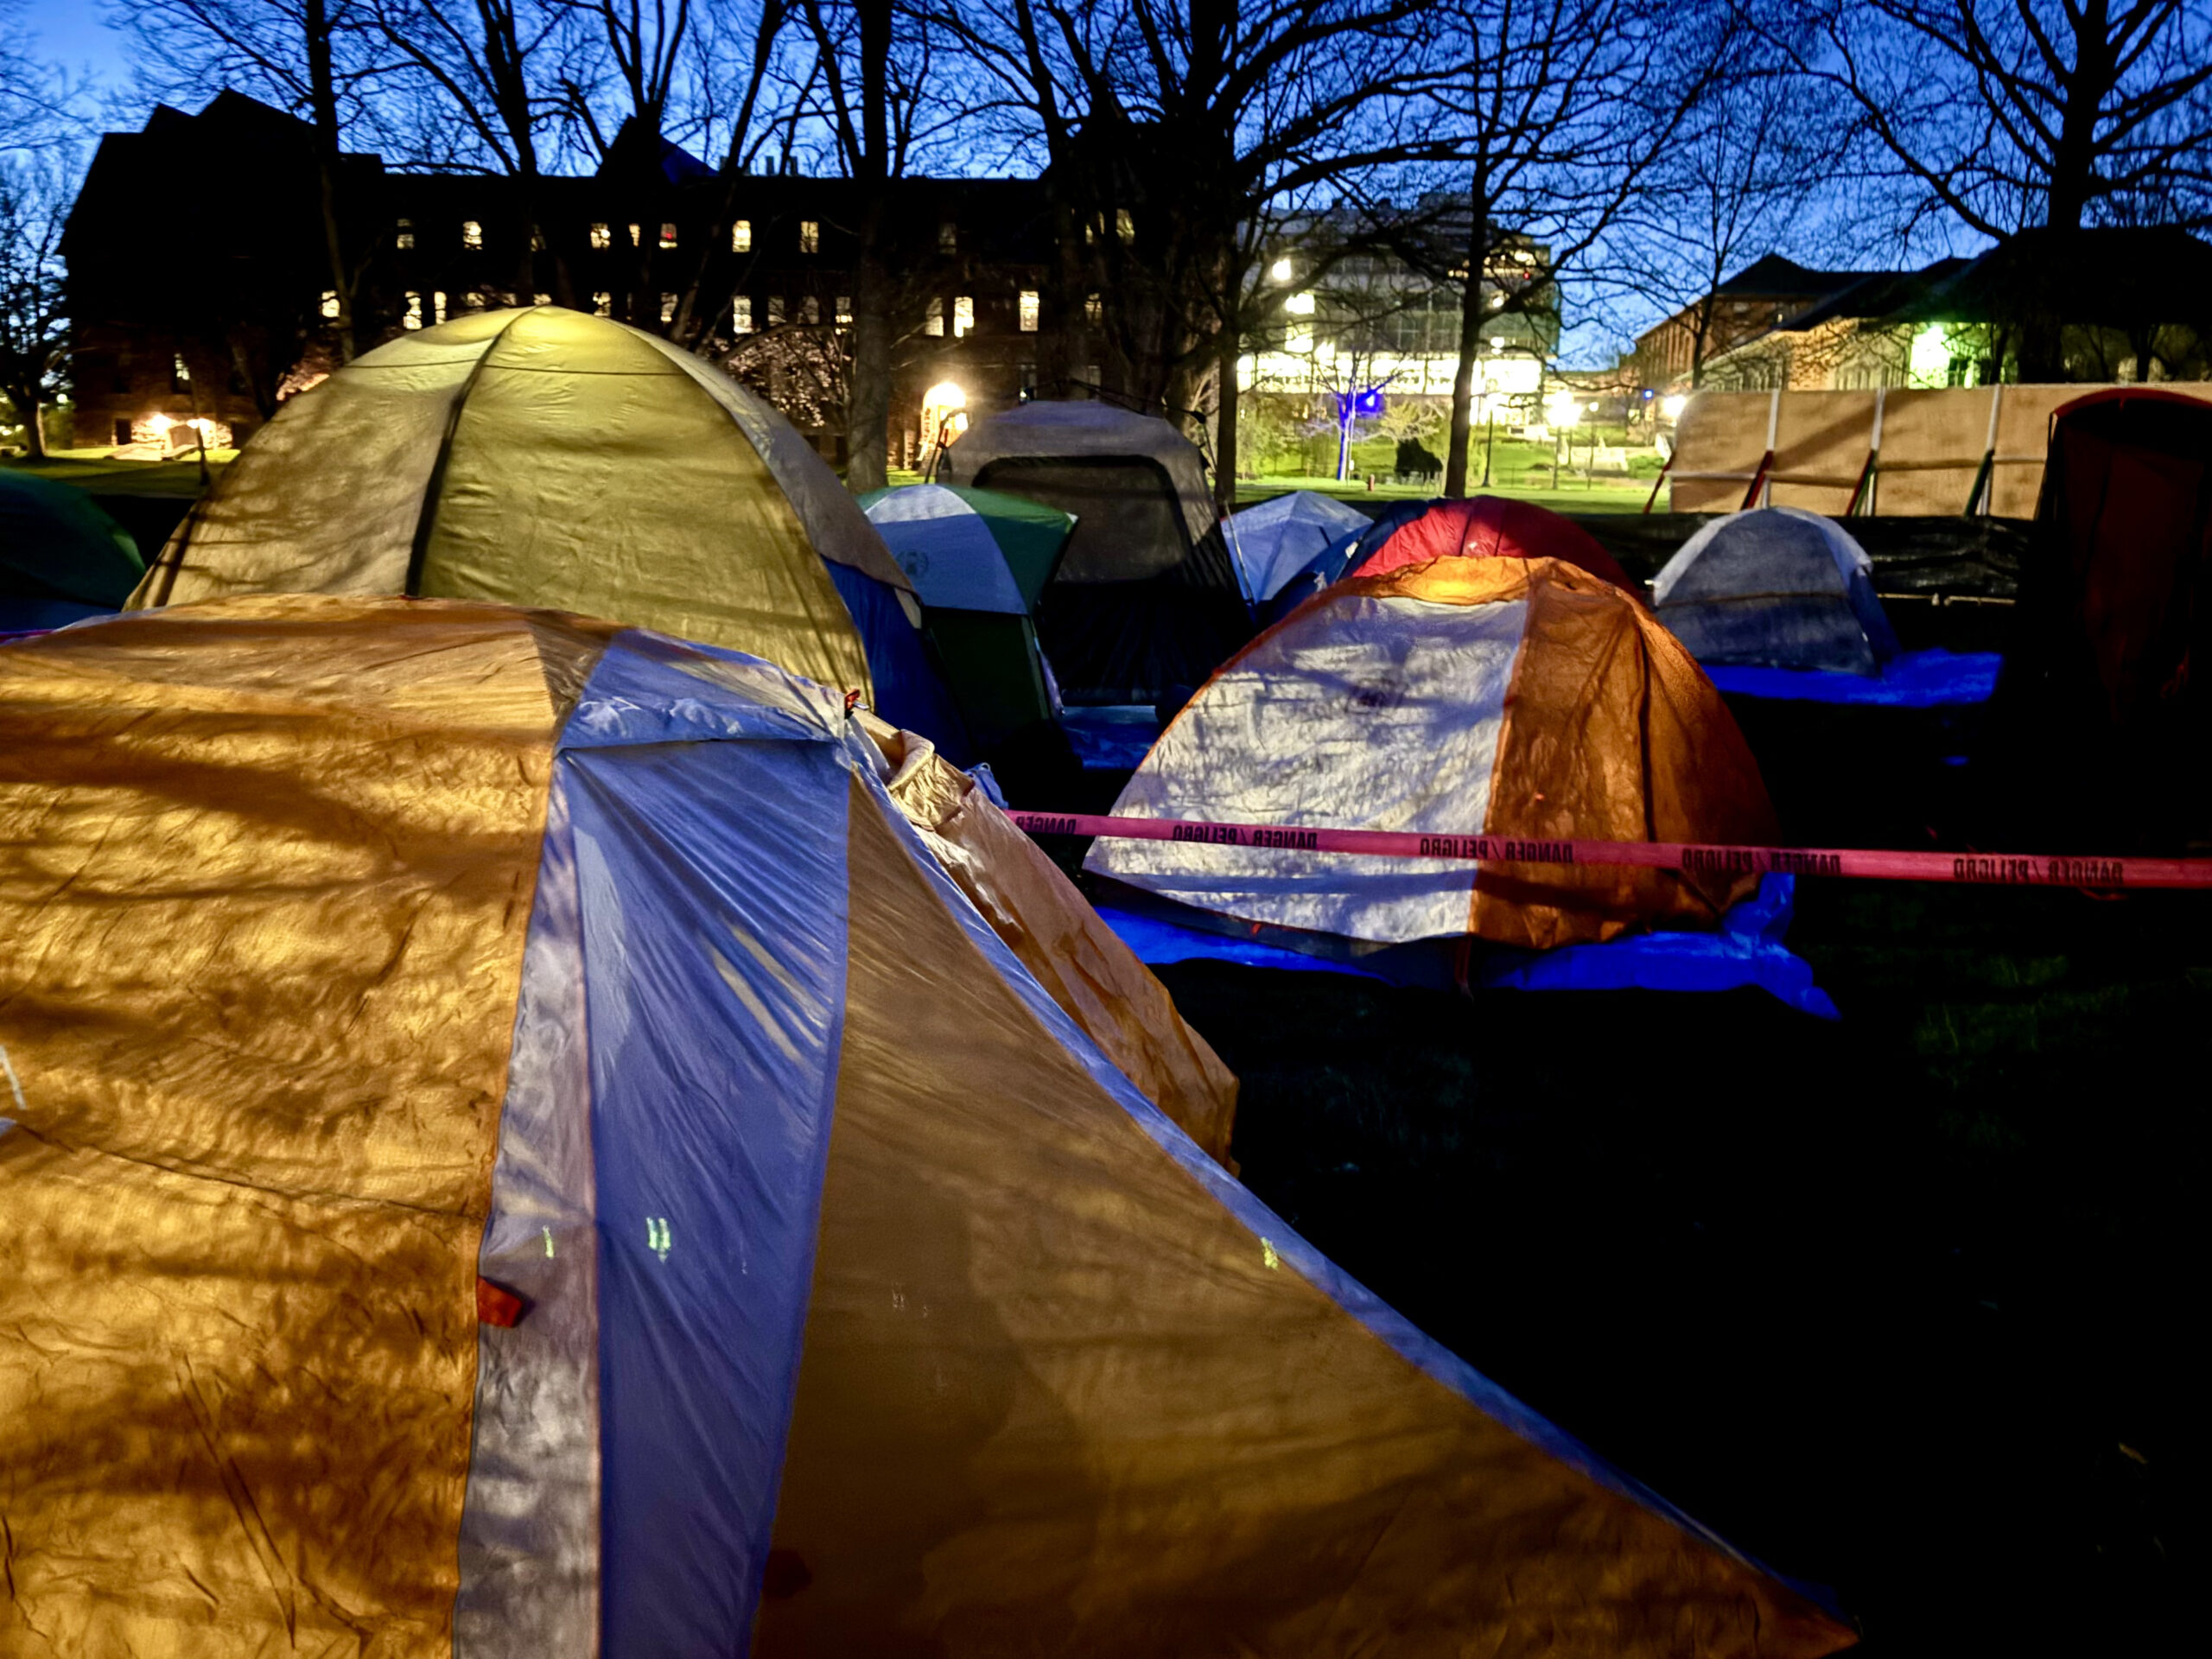 Colorful tents lit under a night sky on Cornell's Arts Quad. Shadows of trees can be seen against the sky.